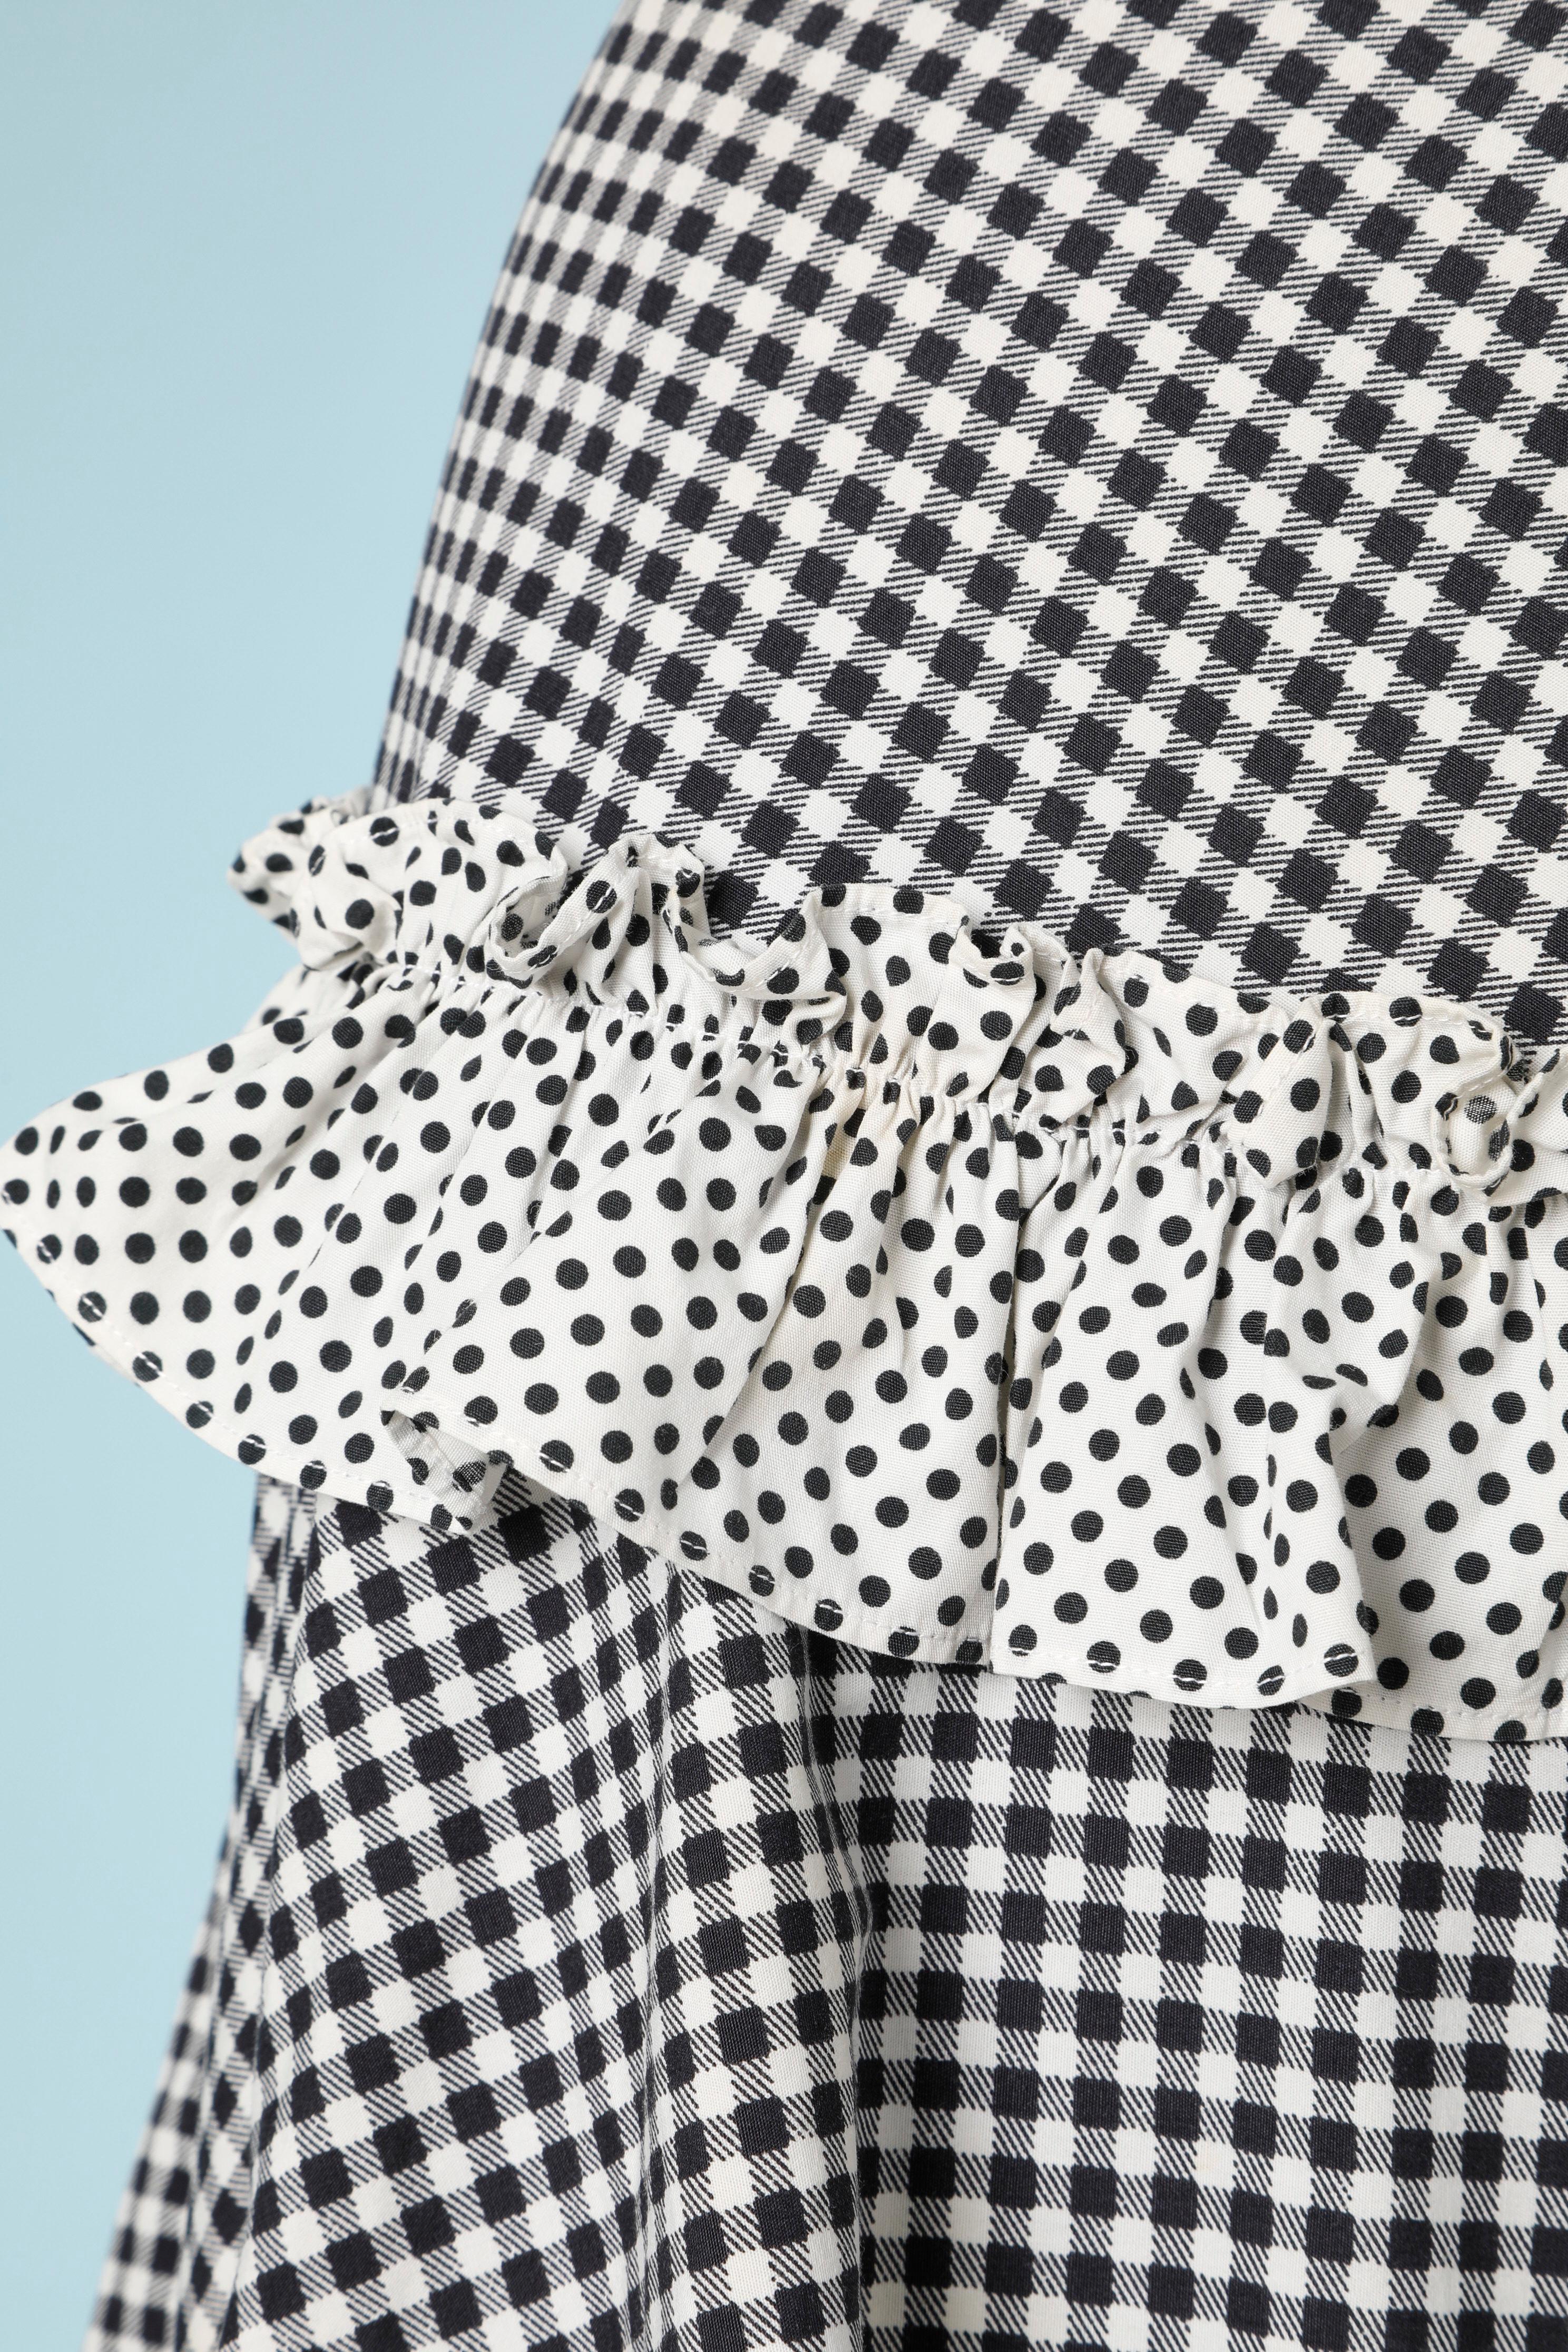 Black&white cotton skirt printed polka-dots and Vichy  with ruffles. 
No lining. Bow on the side 
SIZE S